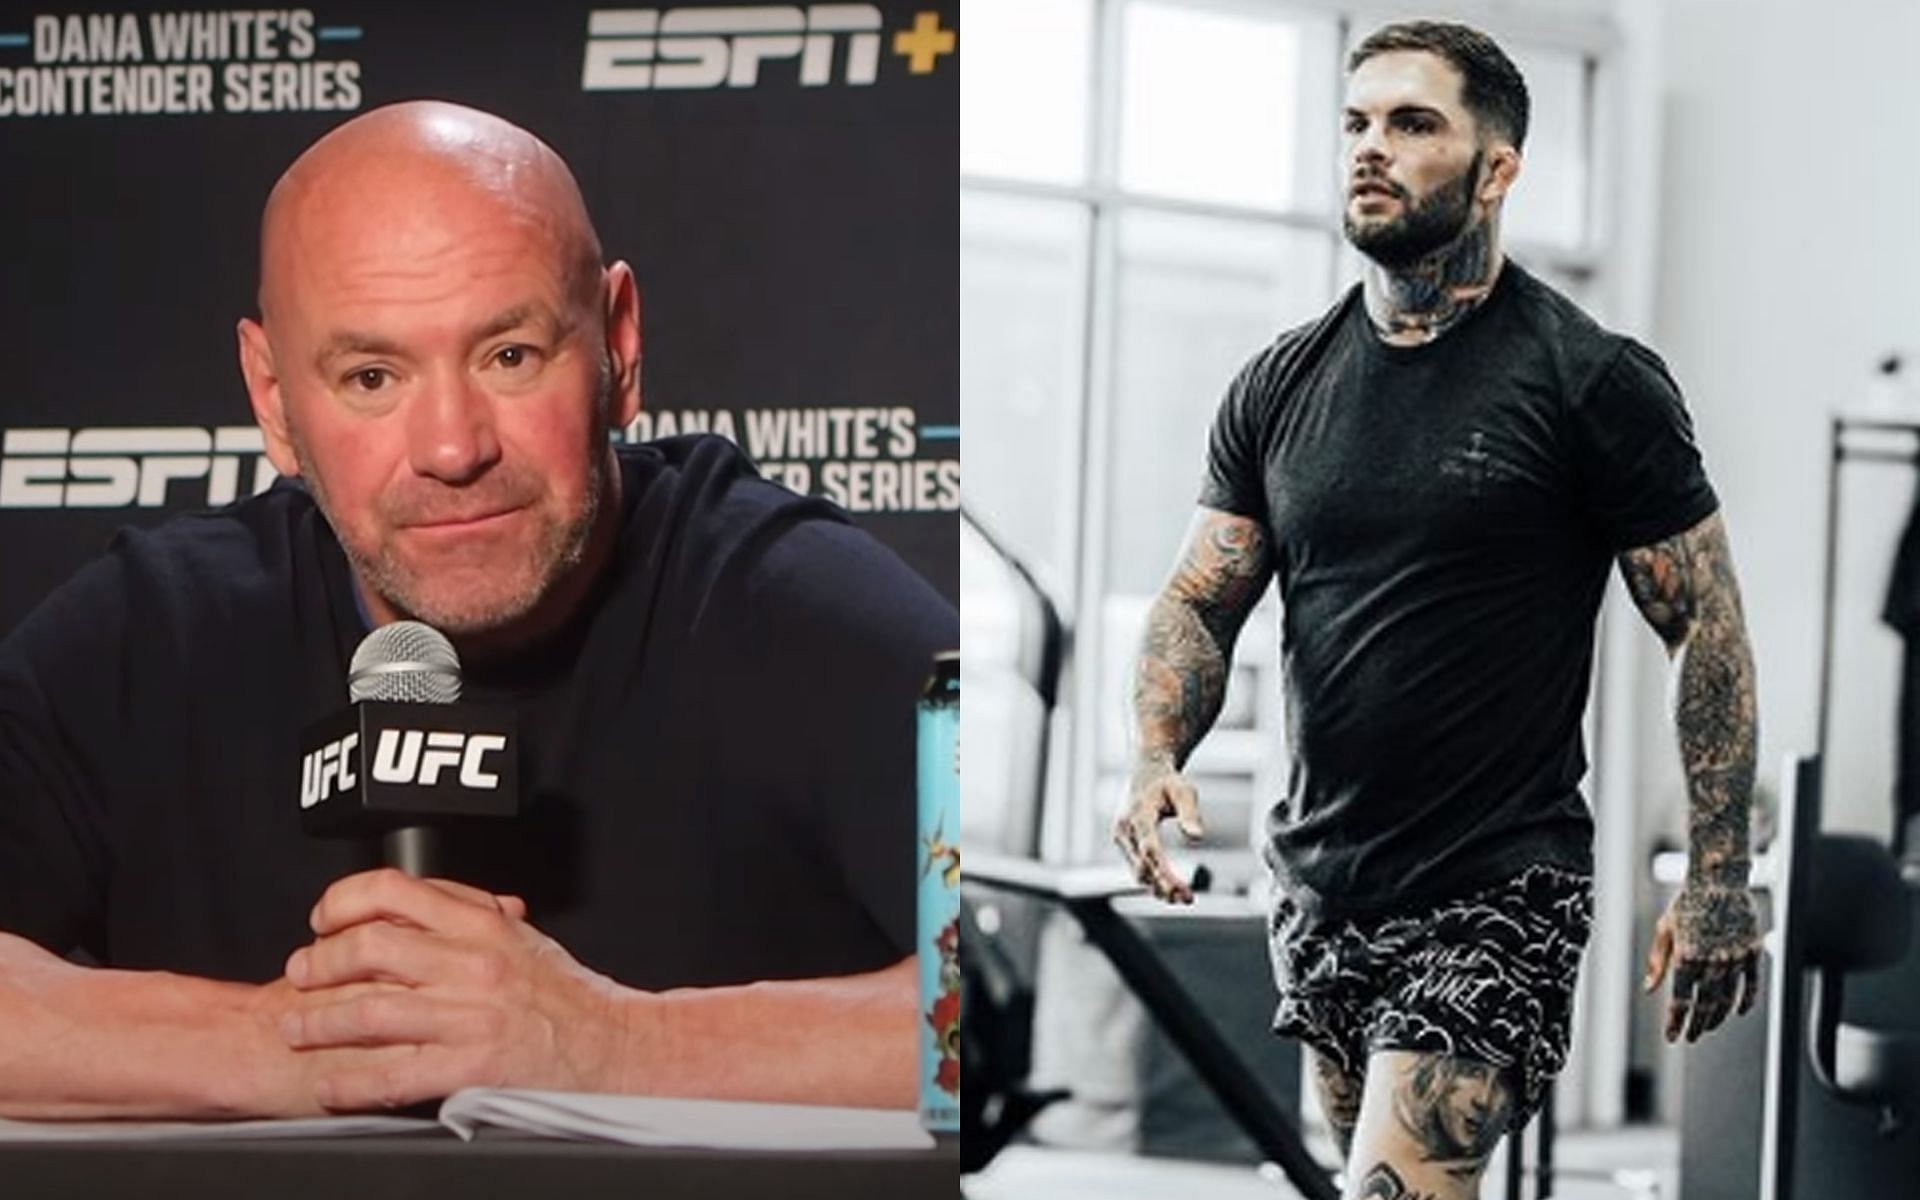 Dana White (left) and Cody garbrandt (right) (Images via UFC YouTube and @cody_nolove Instagram)